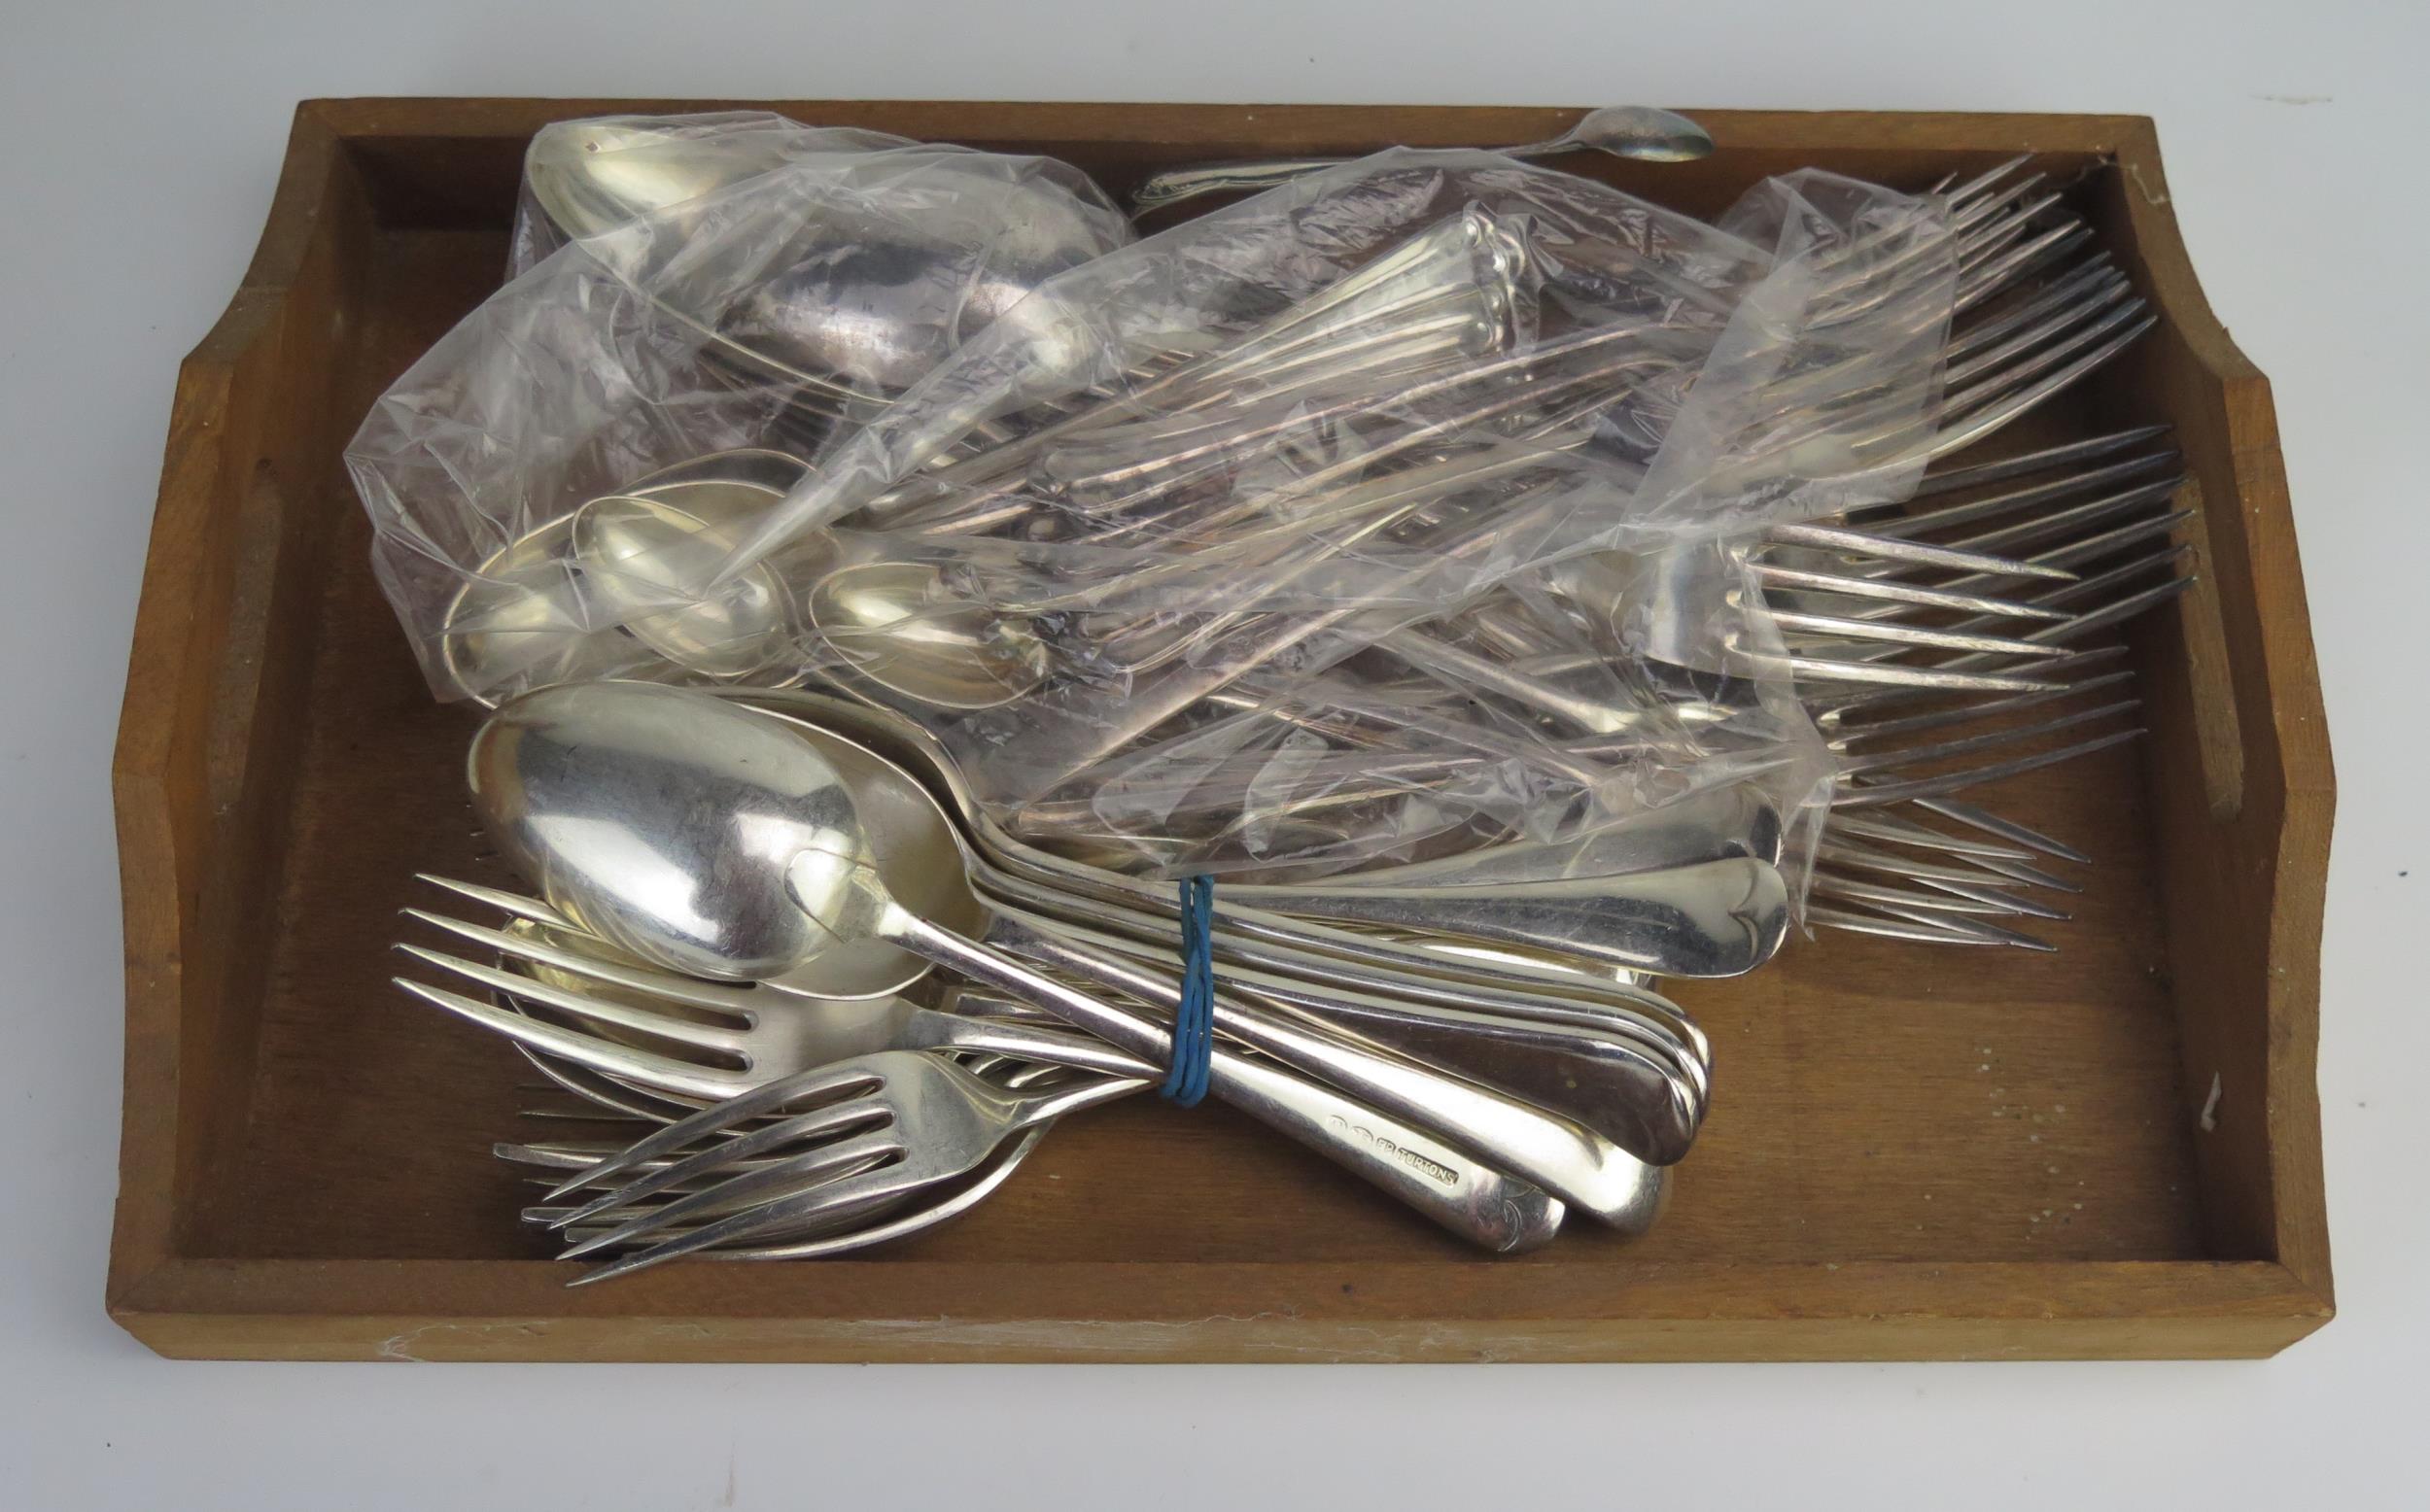 A collection of assorted plated flatwares includes table forks, dessert forks, dessert spoons, etc.